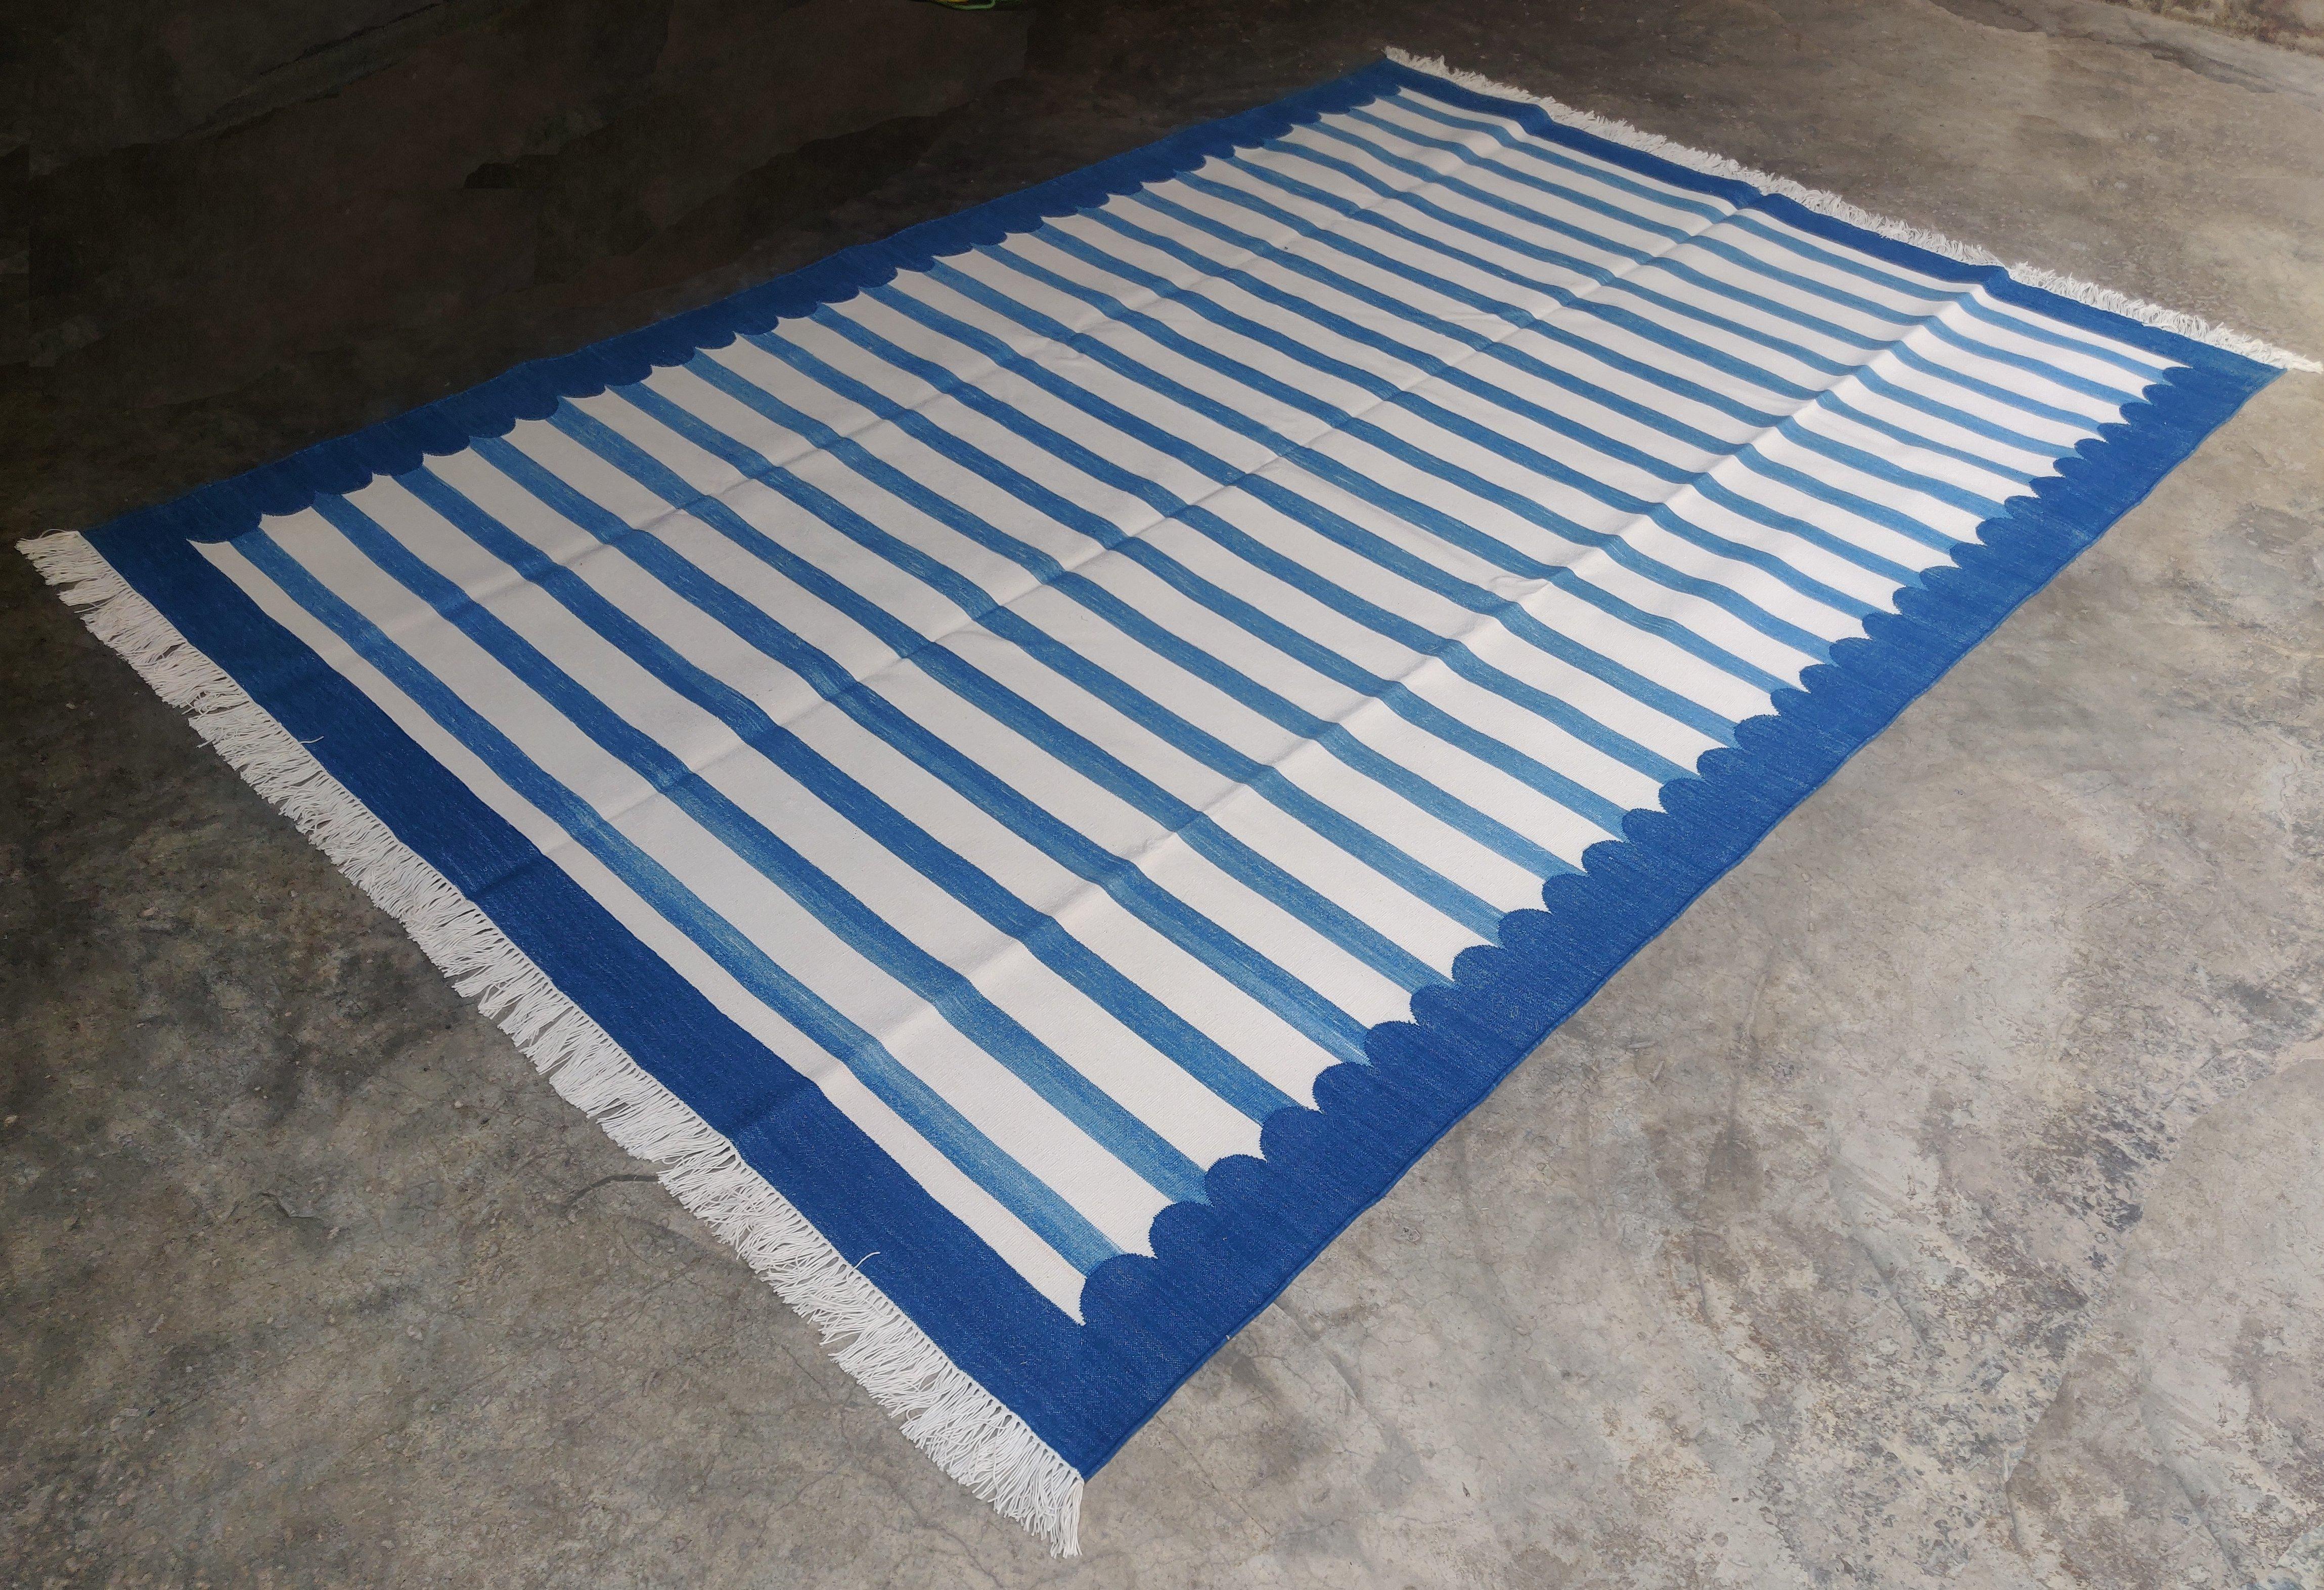 Cotton Vegetable Dyed Indigo Blue and White Striped Scalloped Indian Dhurrie Rug-6'x9' 

These special flat-weave dhurries are hand-woven with 15 ply 100% cotton yarn. Due to the special manufacturing techniques used to create our rugs, the size and